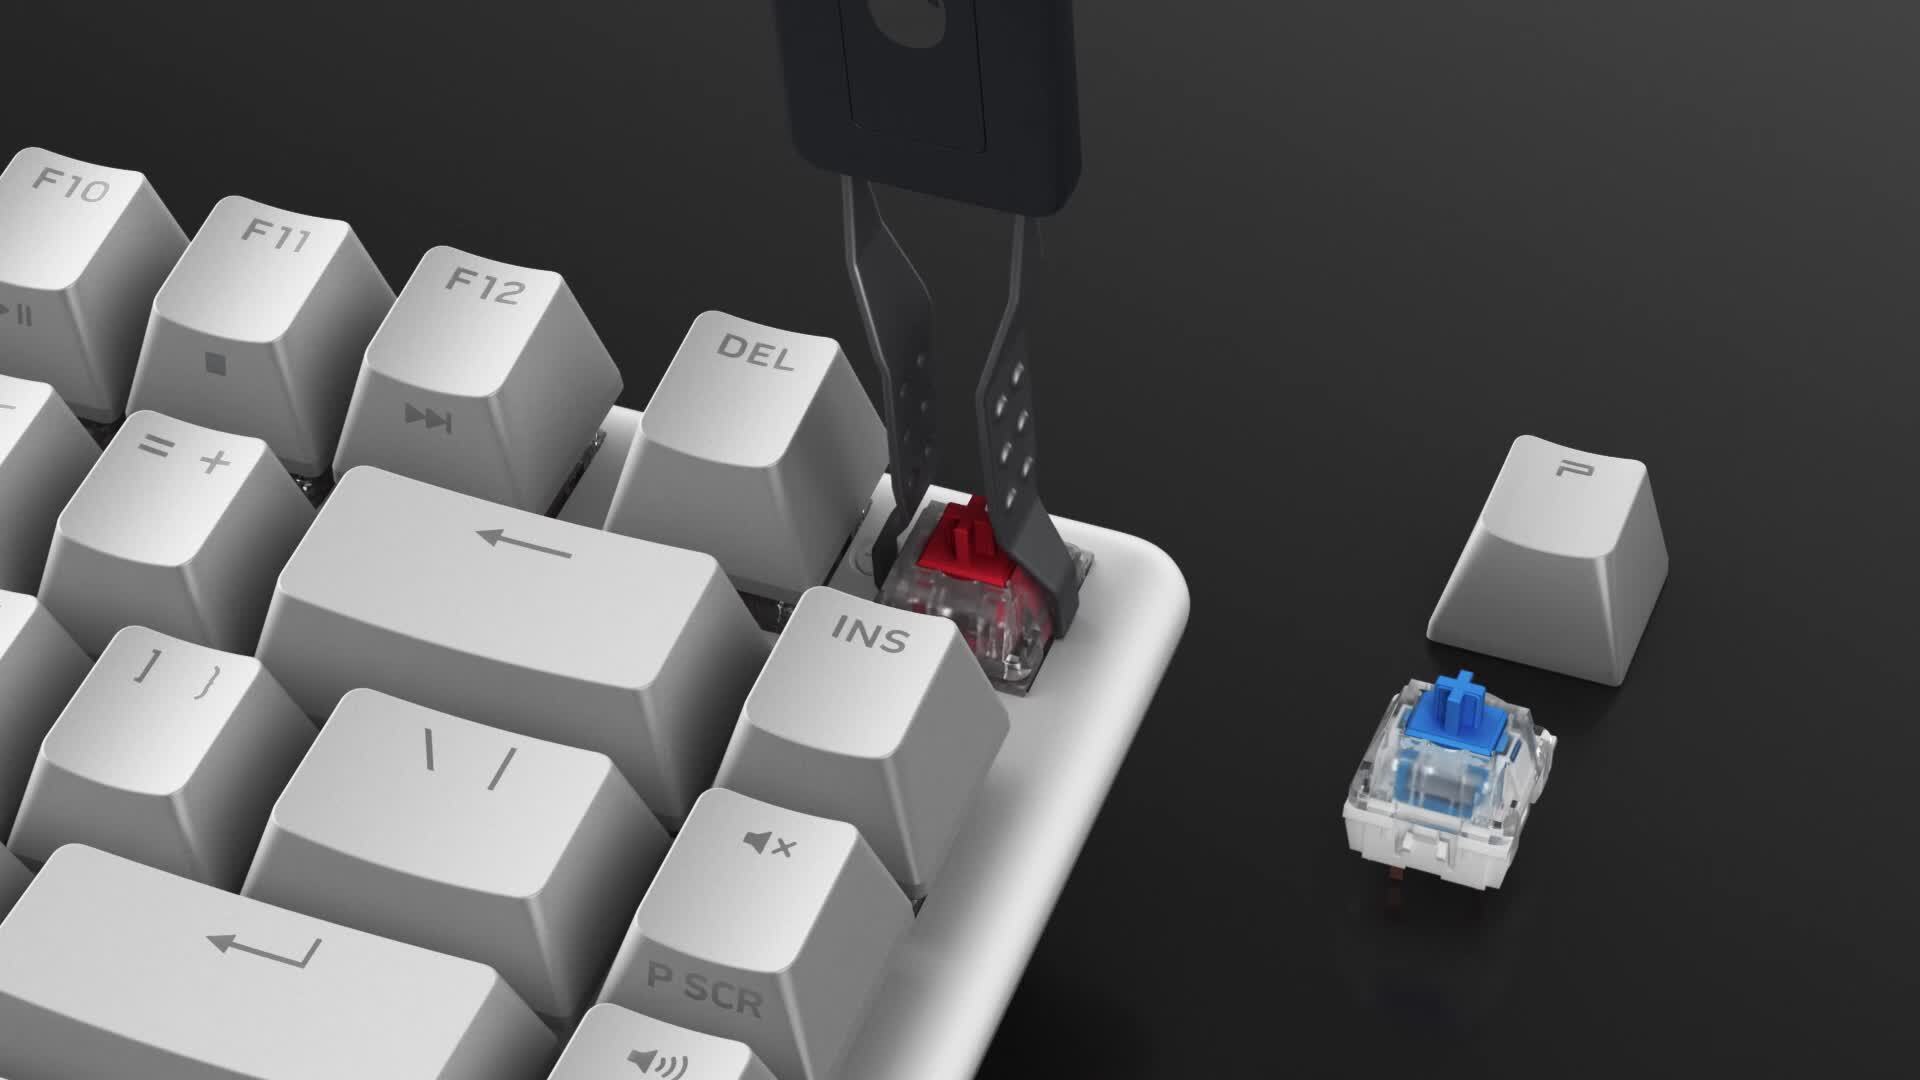 Hot swappable switches